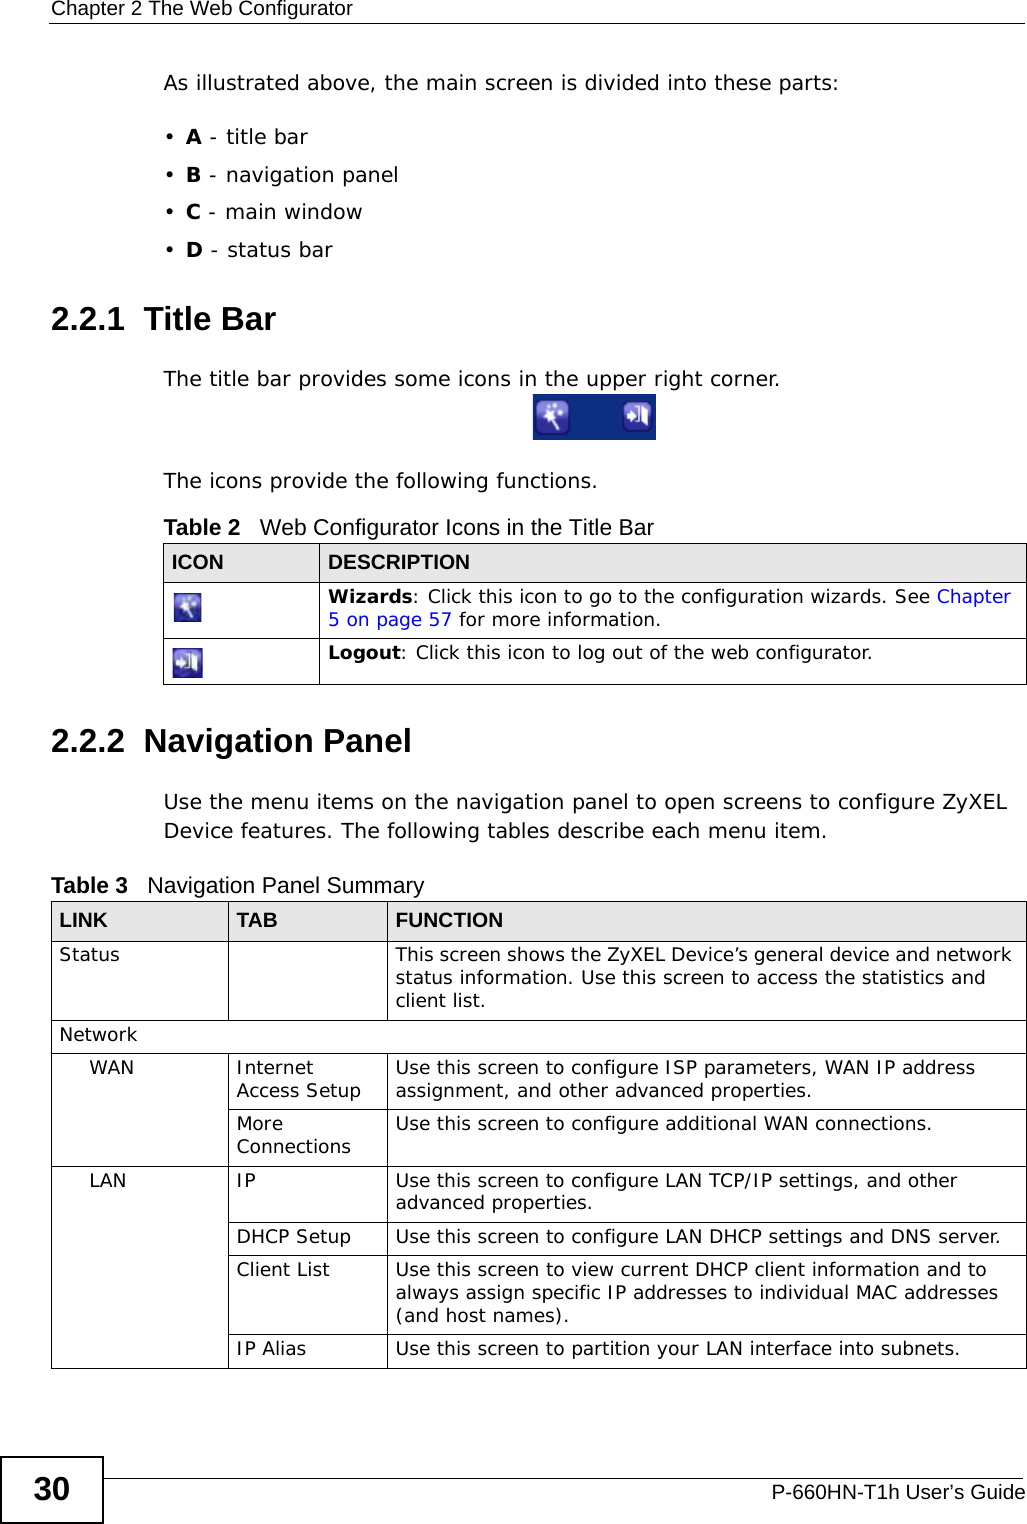 Chapter 2 The Web ConfiguratorP-660HN-T1h User’s Guide30As illustrated above, the main screen is divided into these parts:•A - title bar•B - navigation panel•C - main window•D - status bar2.2.1  Title BarThe title bar provides some icons in the upper right corner.The icons provide the following functions.2.2.2  Navigation PanelUse the menu items on the navigation panel to open screens to configure ZyXEL Device features. The following tables describe each menu item.Table 2   Web Configurator Icons in the Title BarICON  DESCRIPTIONWizards: Click this icon to go to the configuration wizards. See Chapter 5 on page 57 for more information.Logout: Click this icon to log out of the web configurator.Table 3   Navigation Panel SummaryLINK TAB FUNCTIONStatus This screen shows the ZyXEL Device’s general device and network status information. Use this screen to access the statistics and client list.NetworkWAN Internet Access Setup Use this screen to configure ISP parameters, WAN IP address assignment, and other advanced properties.More Connections Use this screen to configure additional WAN connections.LAN IP Use this screen to configure LAN TCP/IP settings, and other advanced properties.DHCP Setup Use this screen to configure LAN DHCP settings and DNS server.Client List Use this screen to view current DHCP client information and to always assign specific IP addresses to individual MAC addresses (and host names).IP Alias Use this screen to partition your LAN interface into subnets.